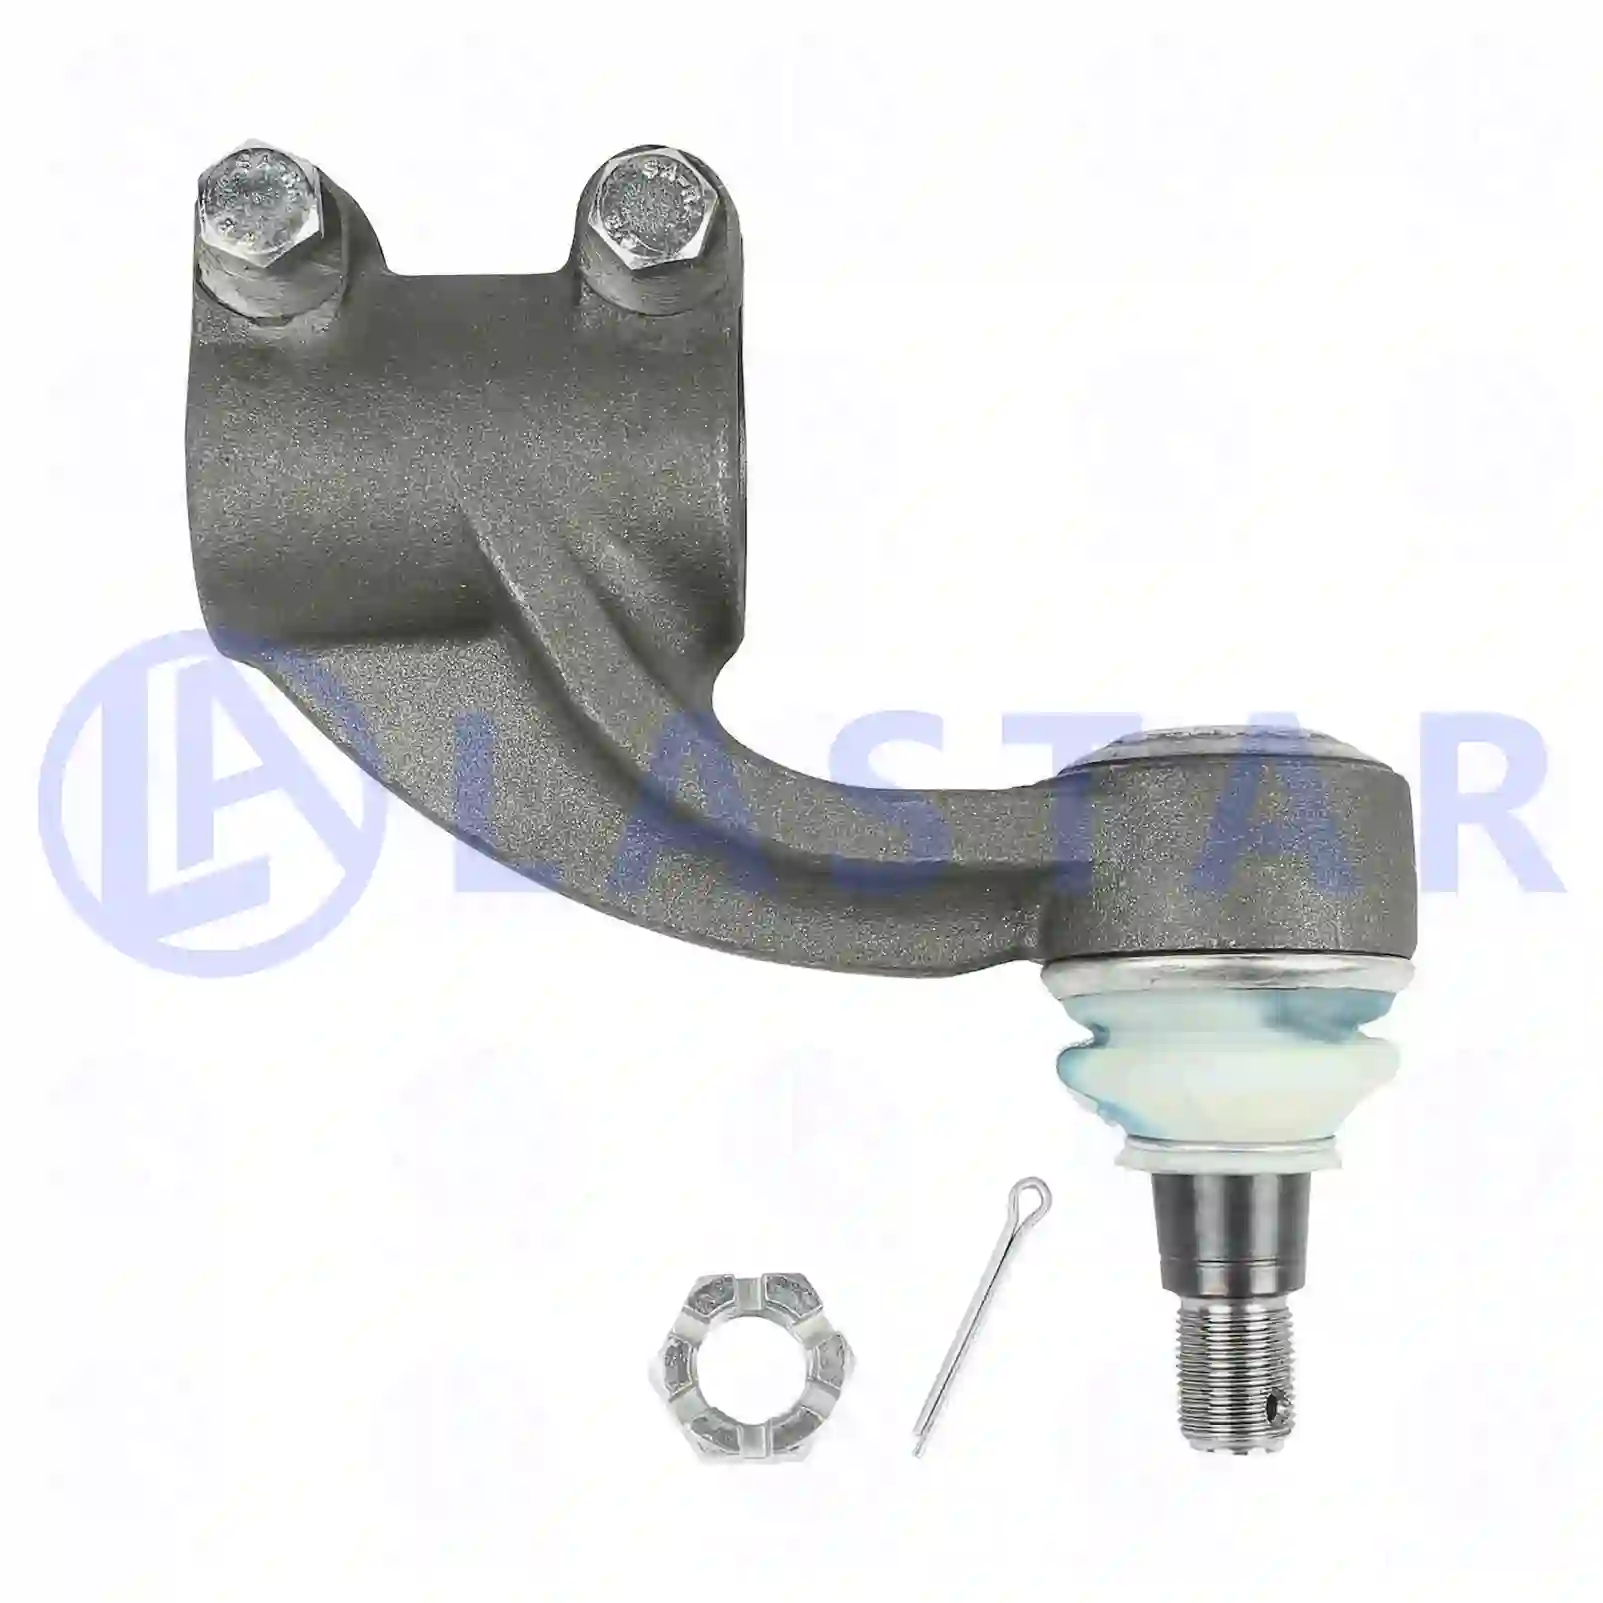 Ball joint, right hand thread, 77705812, 1131742, 1696901, 1699401, 6882152, 6889484, , ||  77705812 Lastar Spare Part | Truck Spare Parts, Auotomotive Spare Parts Ball joint, right hand thread, 77705812, 1131742, 1696901, 1699401, 6882152, 6889484, , ||  77705812 Lastar Spare Part | Truck Spare Parts, Auotomotive Spare Parts